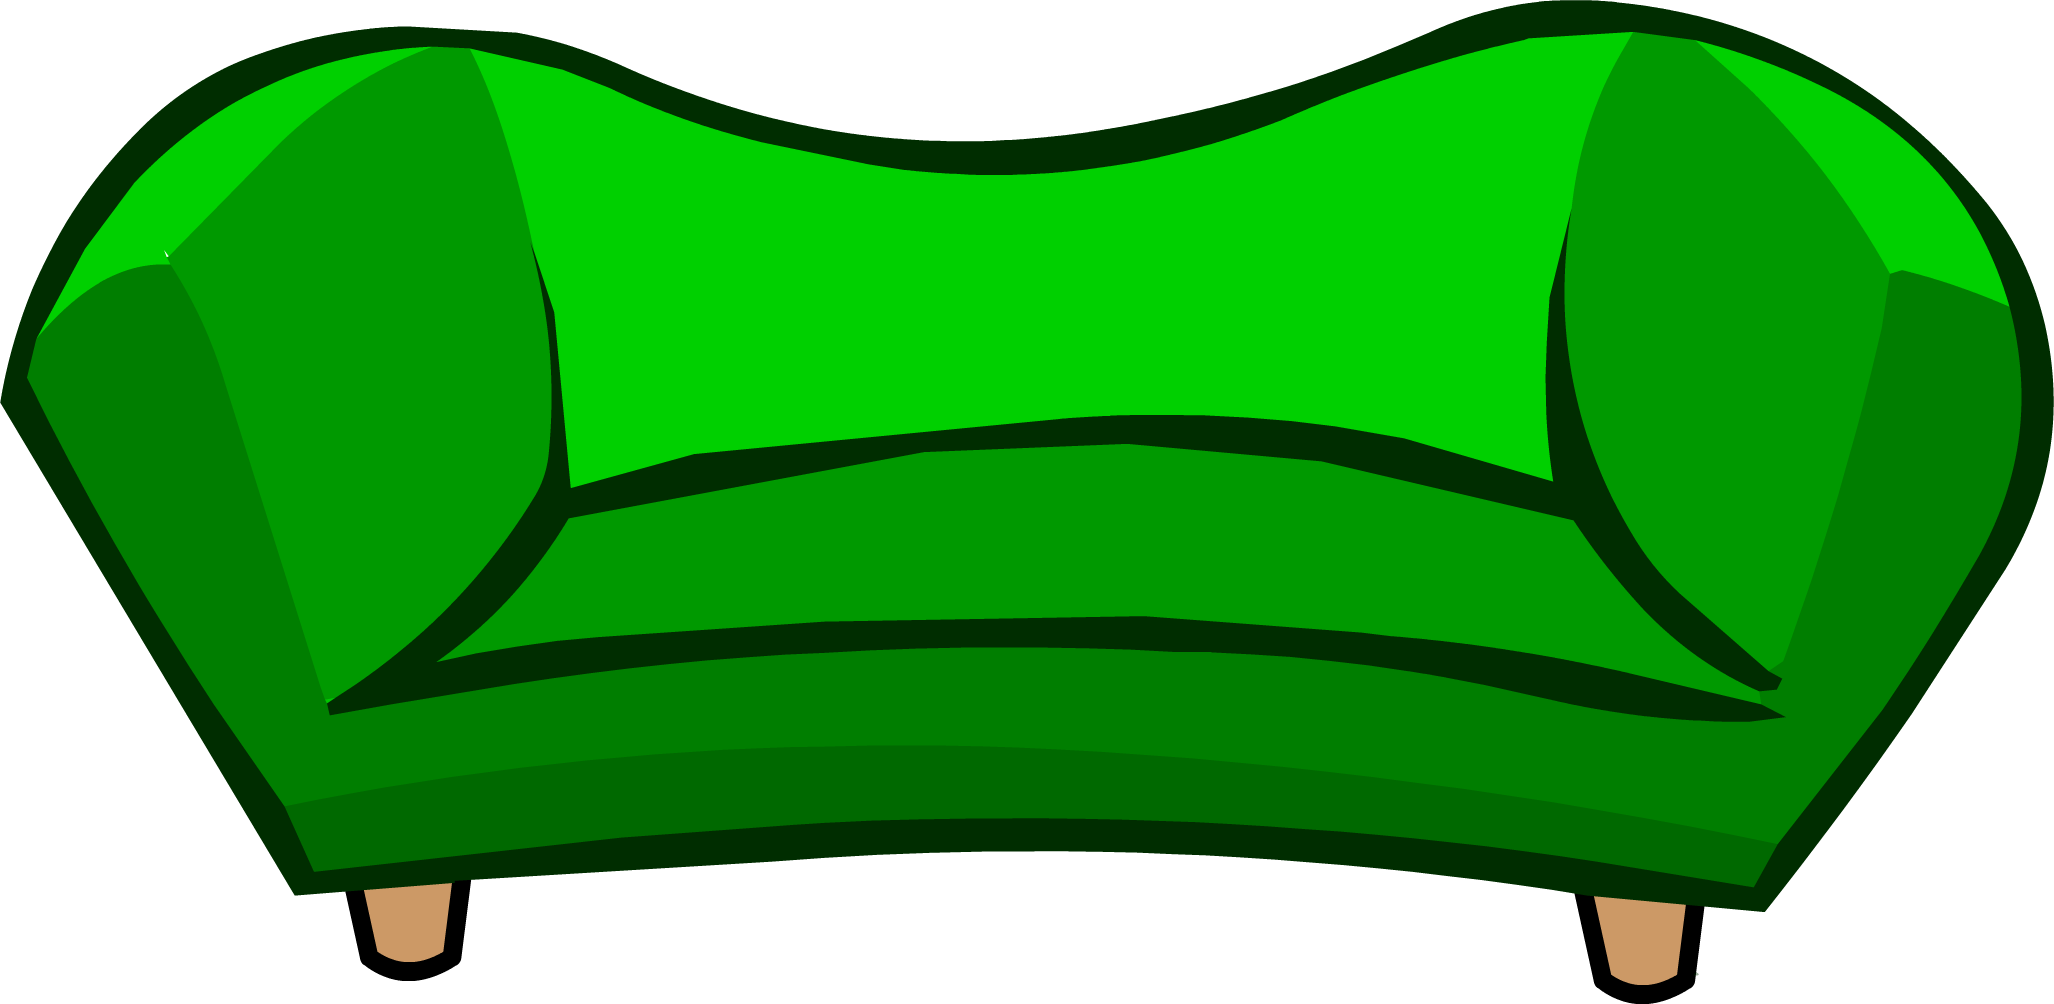 Couch Images - Club Penguin Sofa (2054x1004)